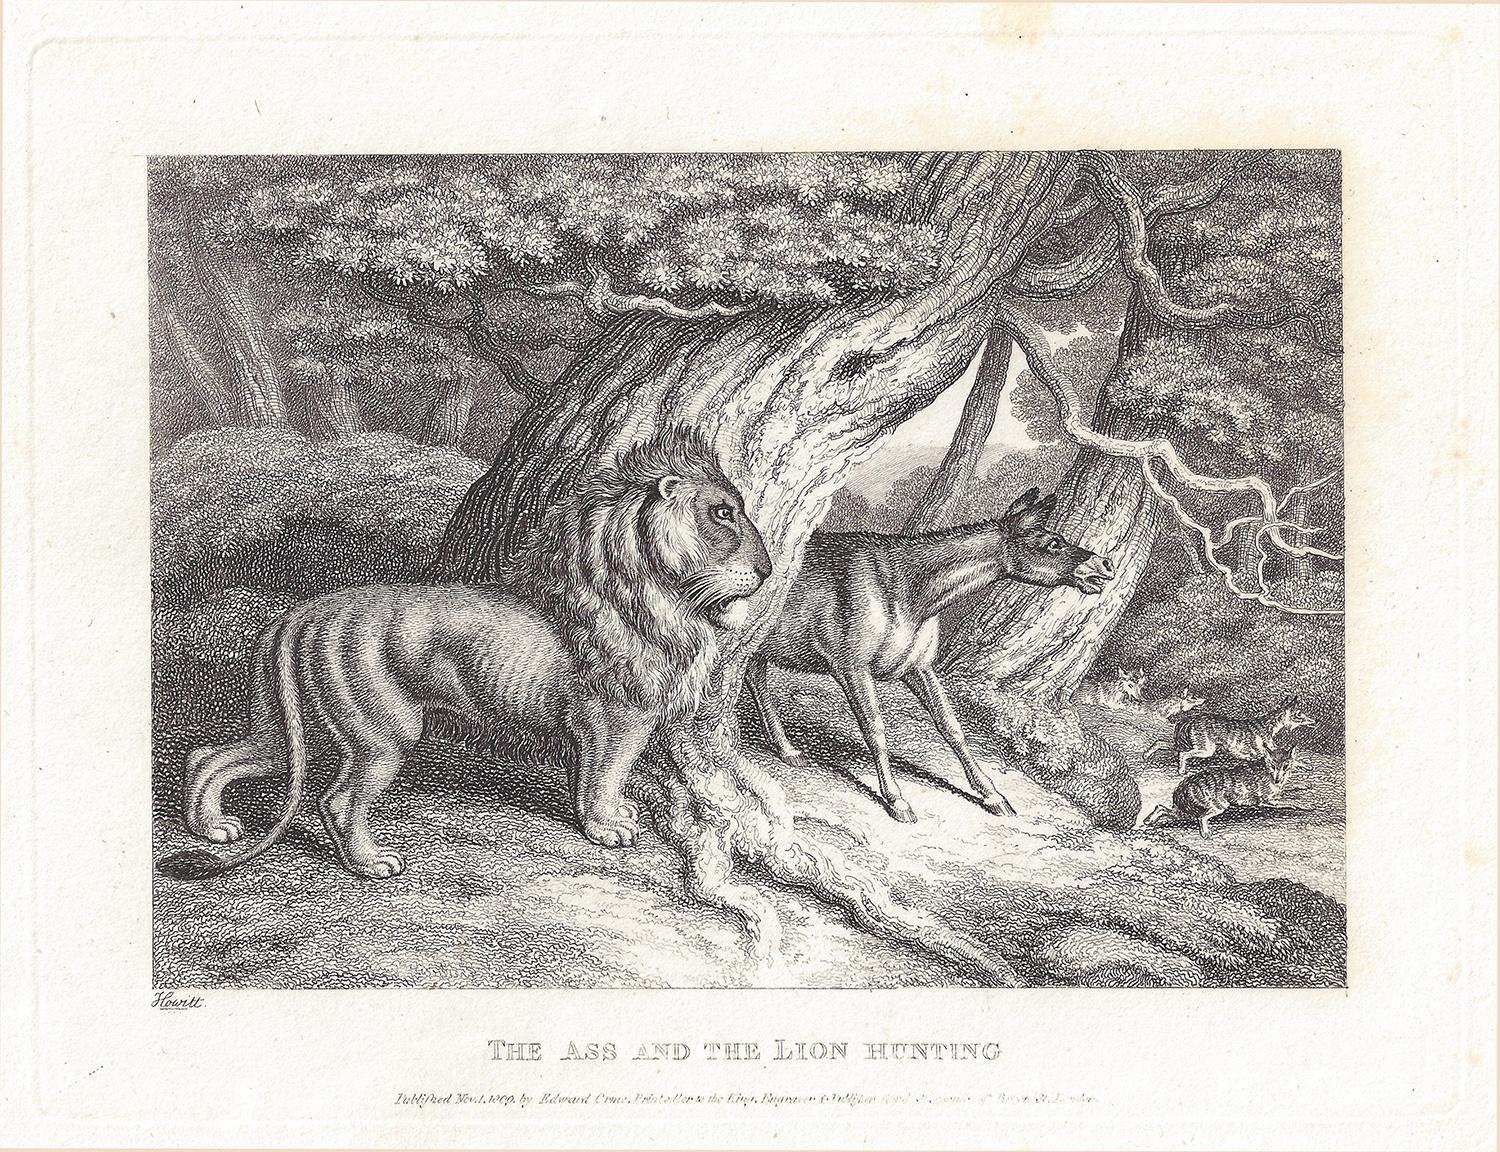 Ass and the Lion Hunting, antique animal fable etching by Samuel Howitt